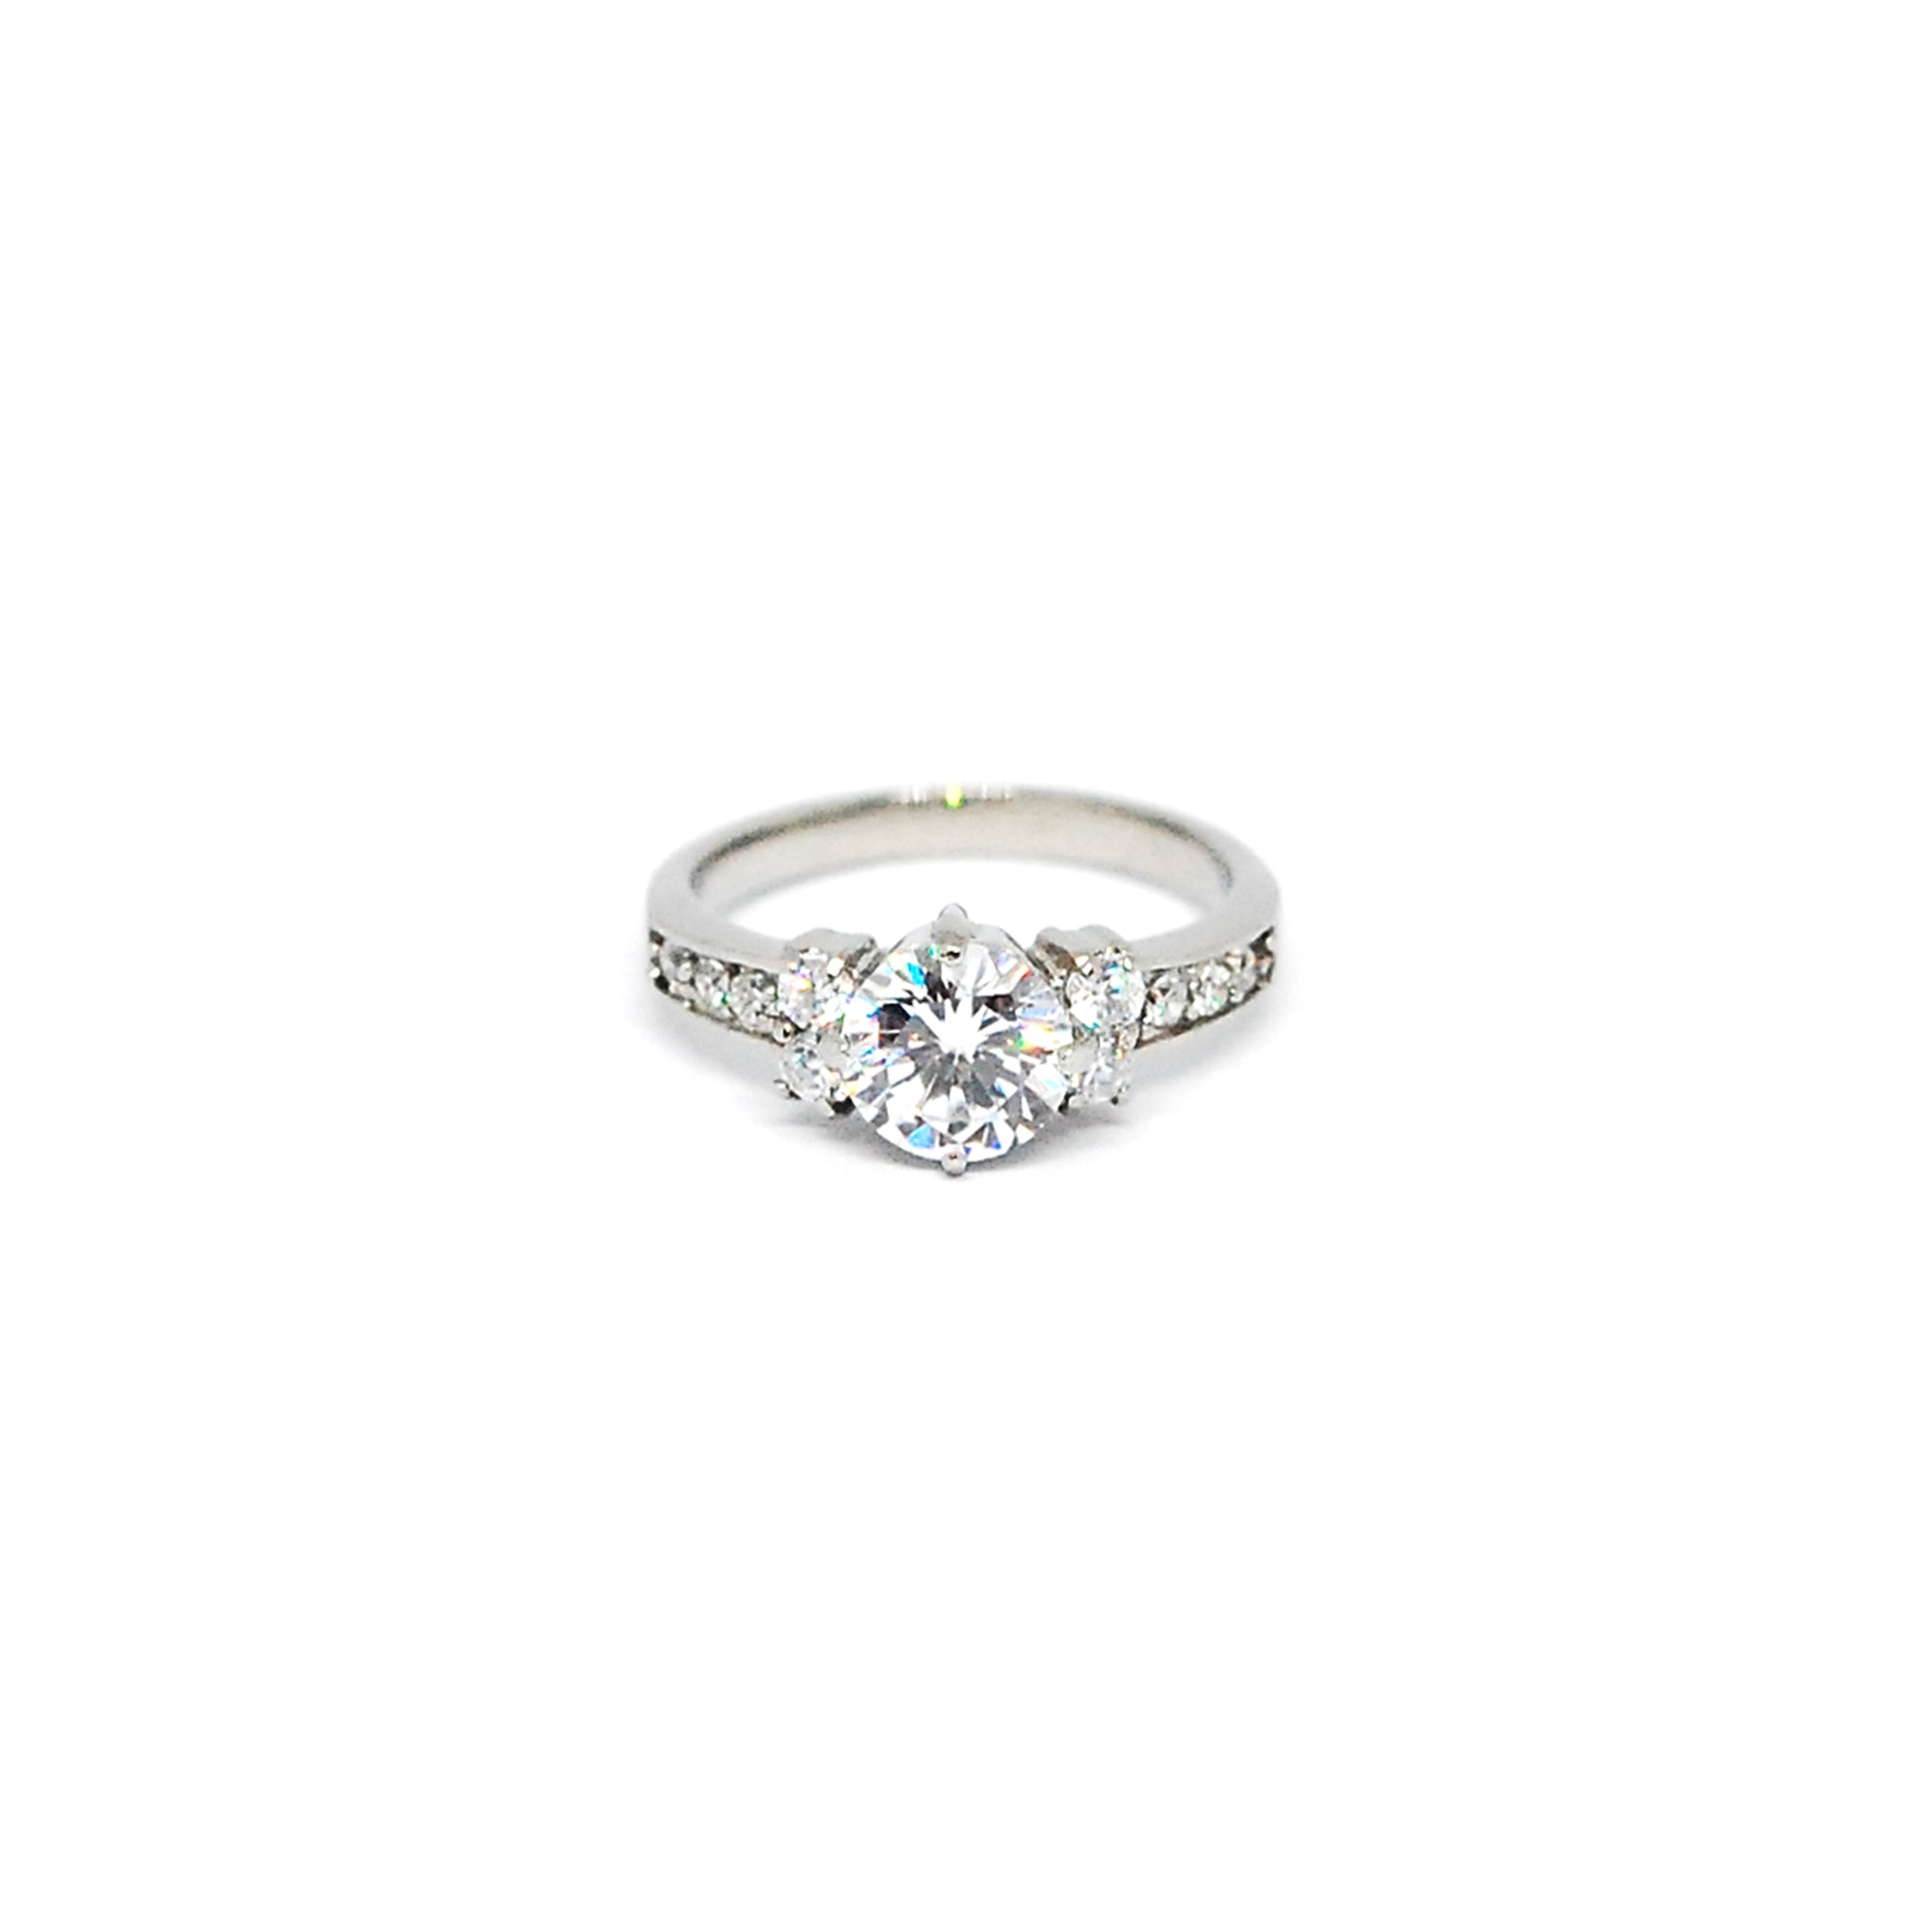 ESR 7560: Christina 7mm Cubic zirconia Center Ring with 4 x 2mm Cubic ziconia Accents & Paved Sides Ring